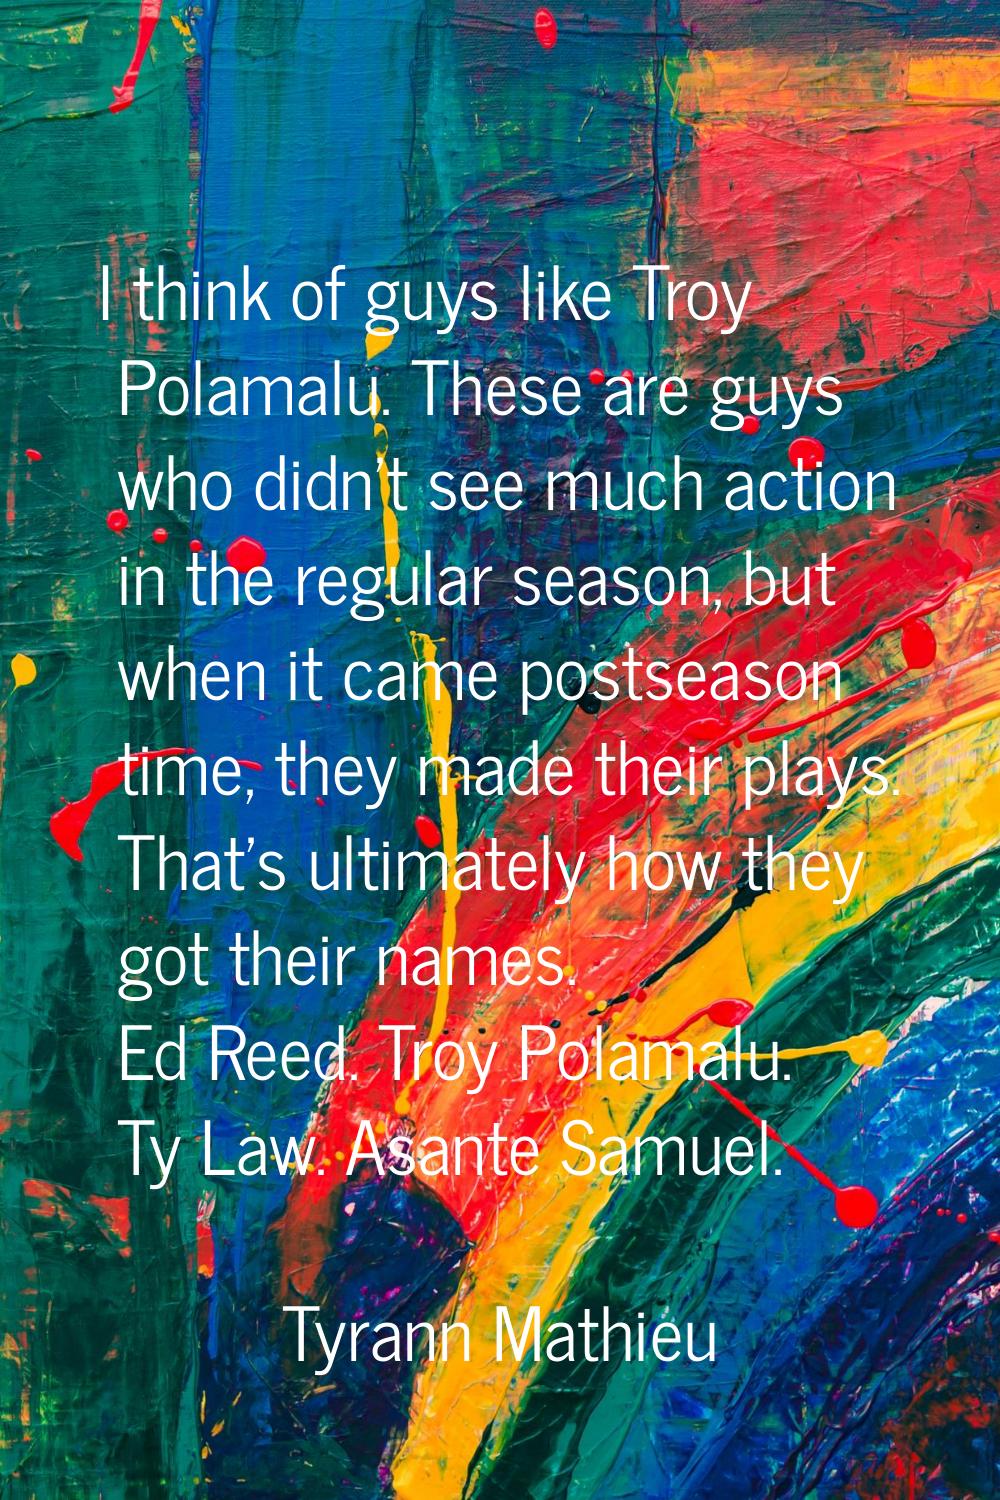 I think of guys like Troy Polamalu. These are guys who didn't see much action in the regular season